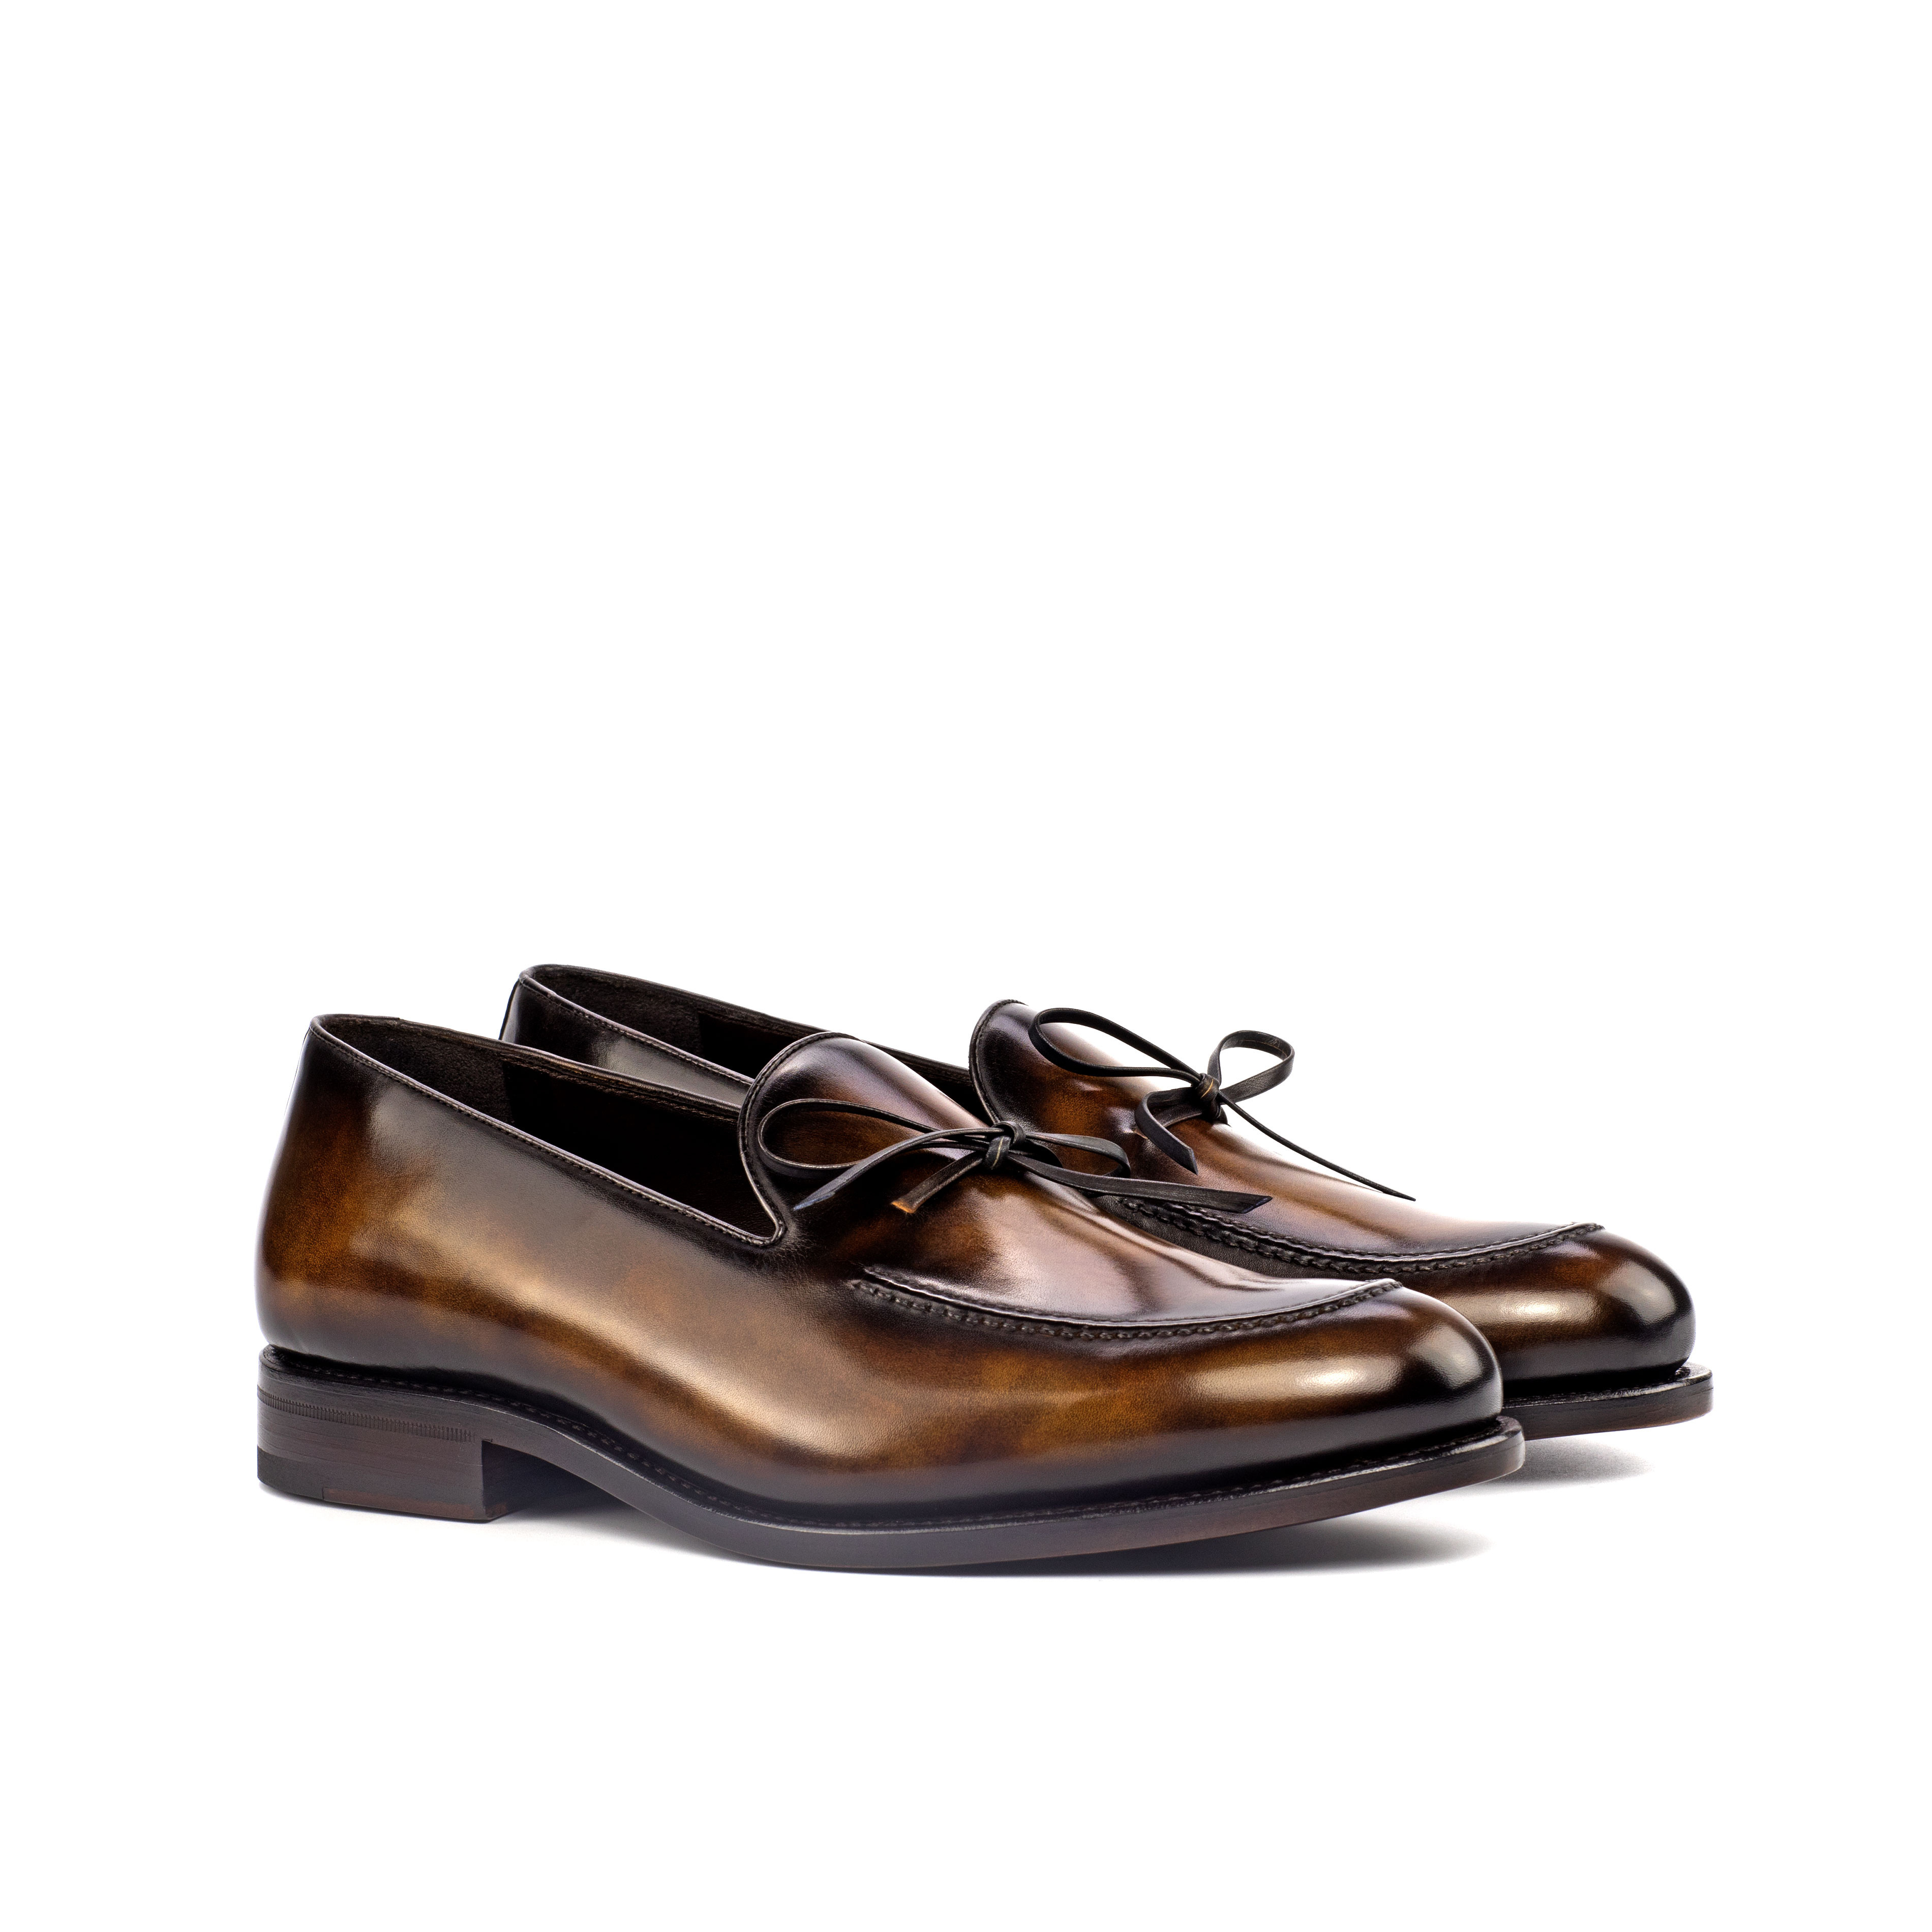 Tobacco Crust Patina Loafer